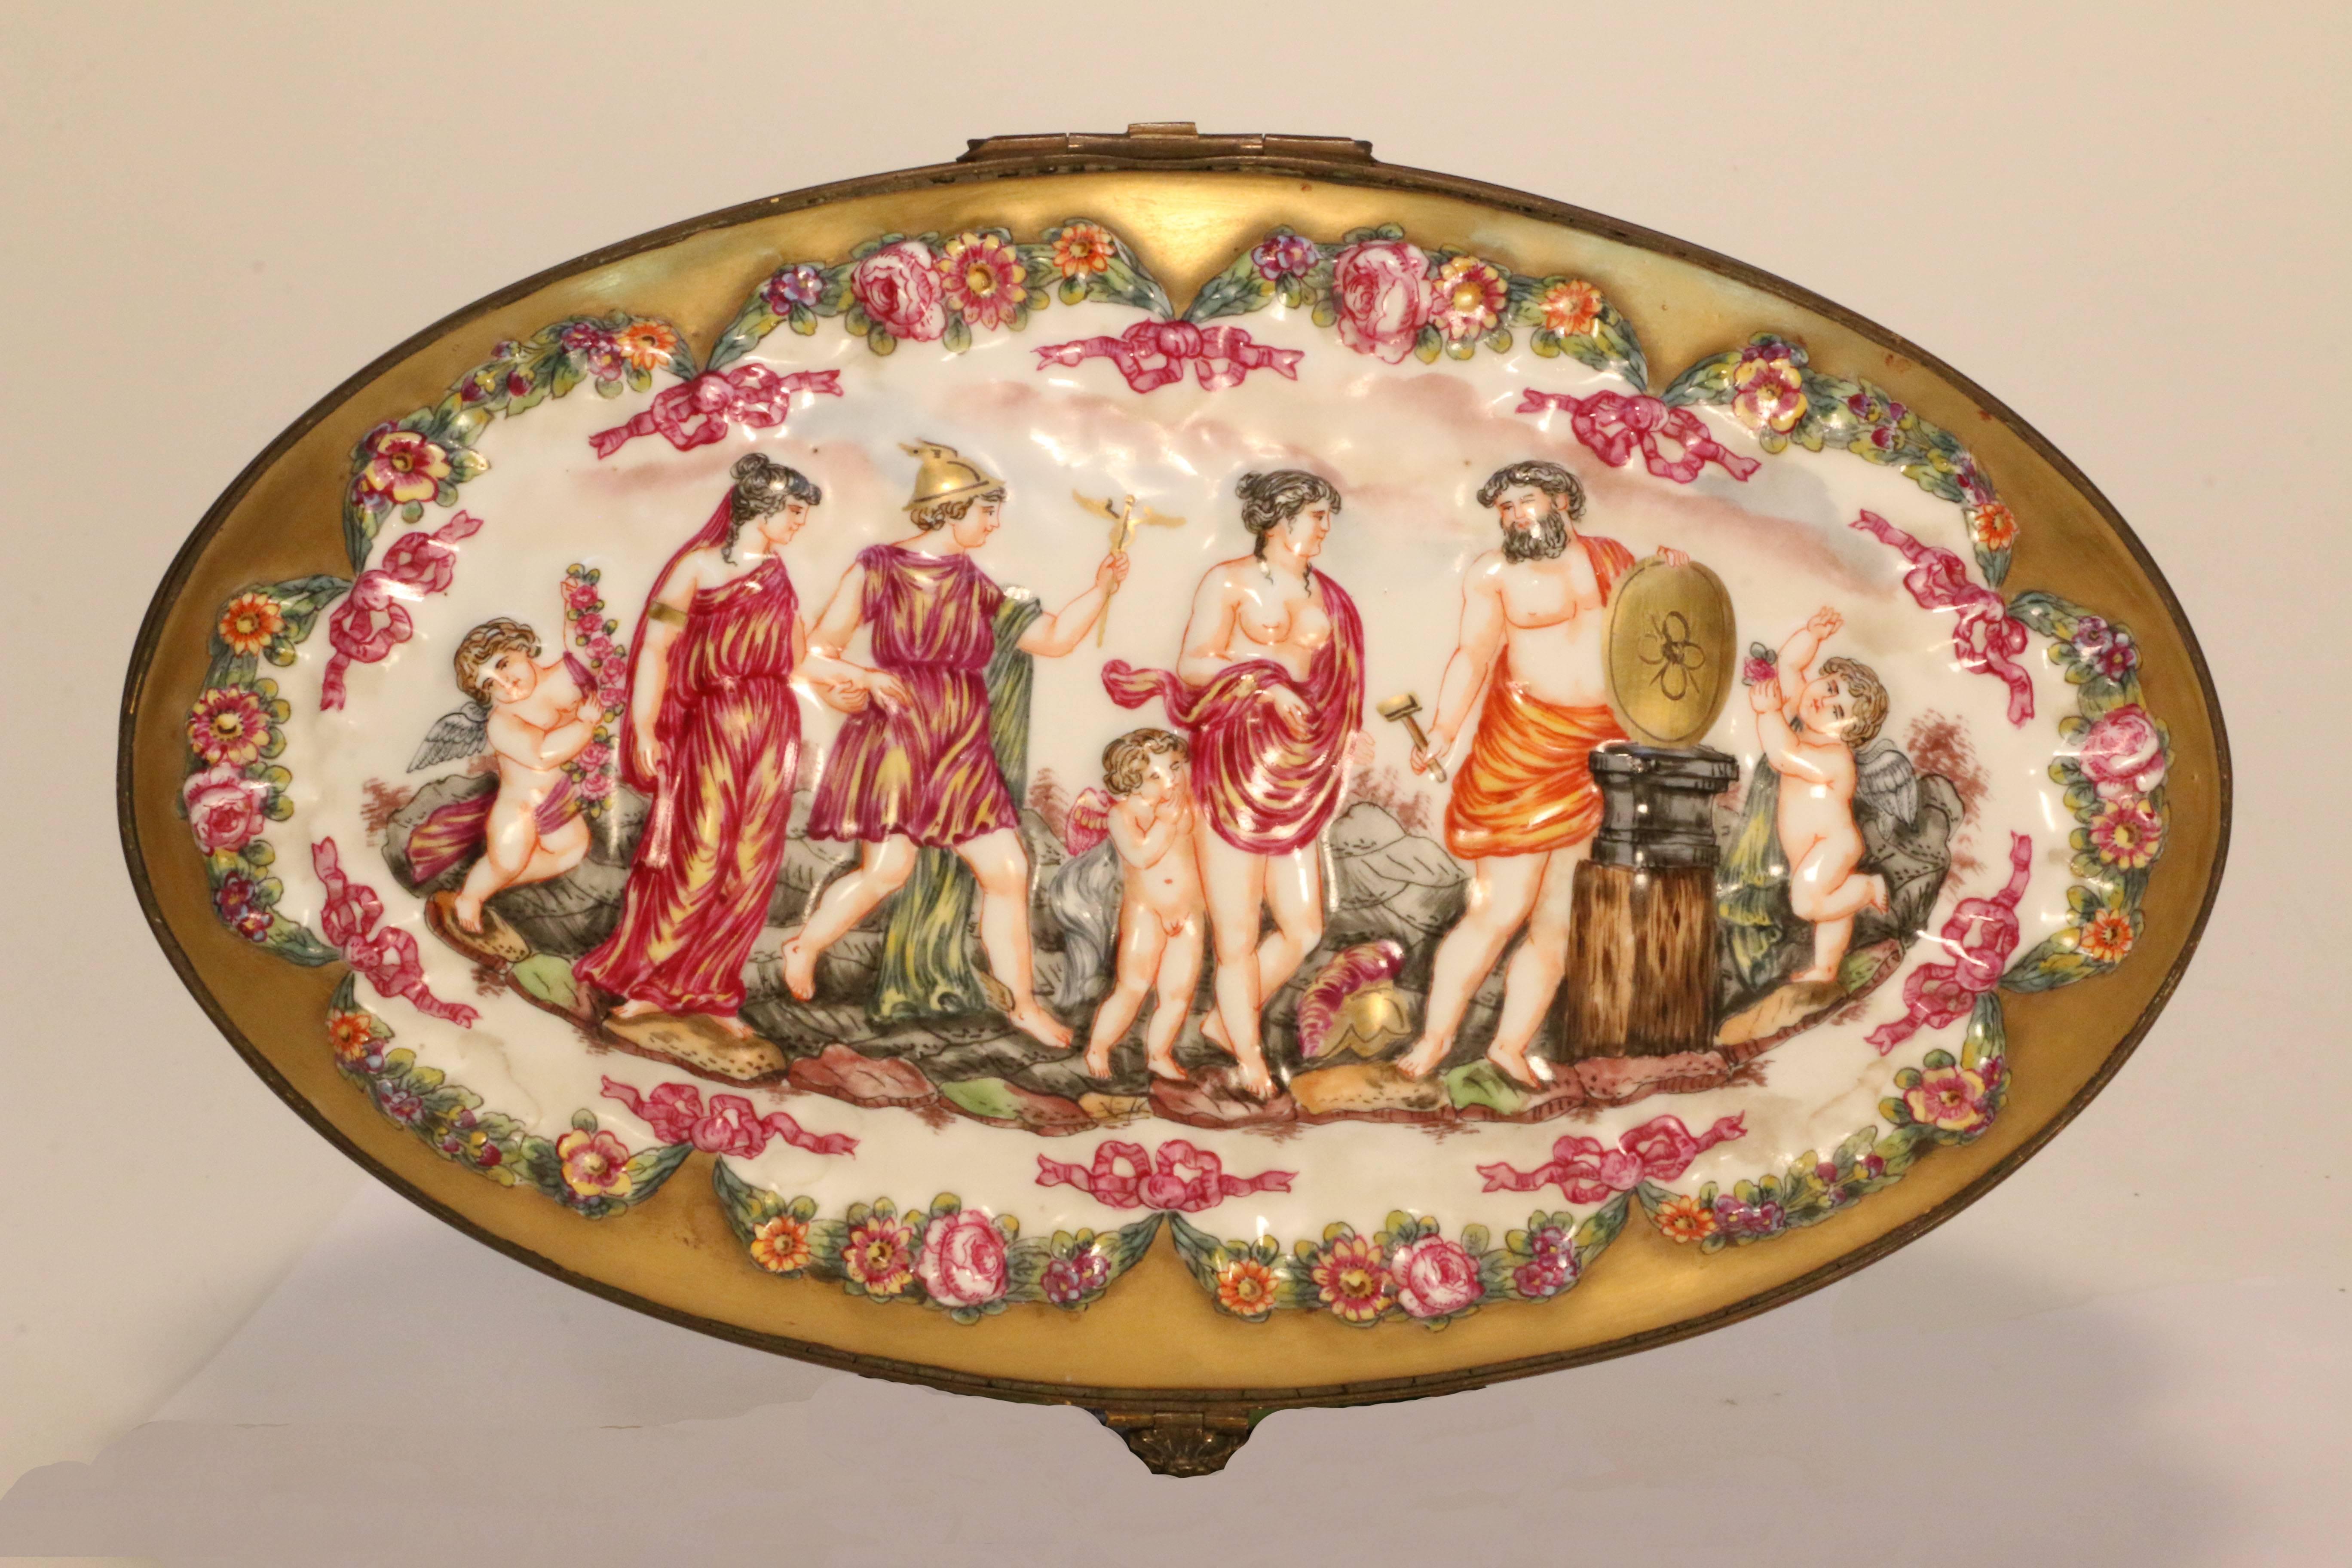 This box is an unusually large and decorative example of the work of this factory. Both highly ornamental and functional, it is ideal for dressing table or more formal settings. The decoration is molded with bas-reliefs and painted with scenes from